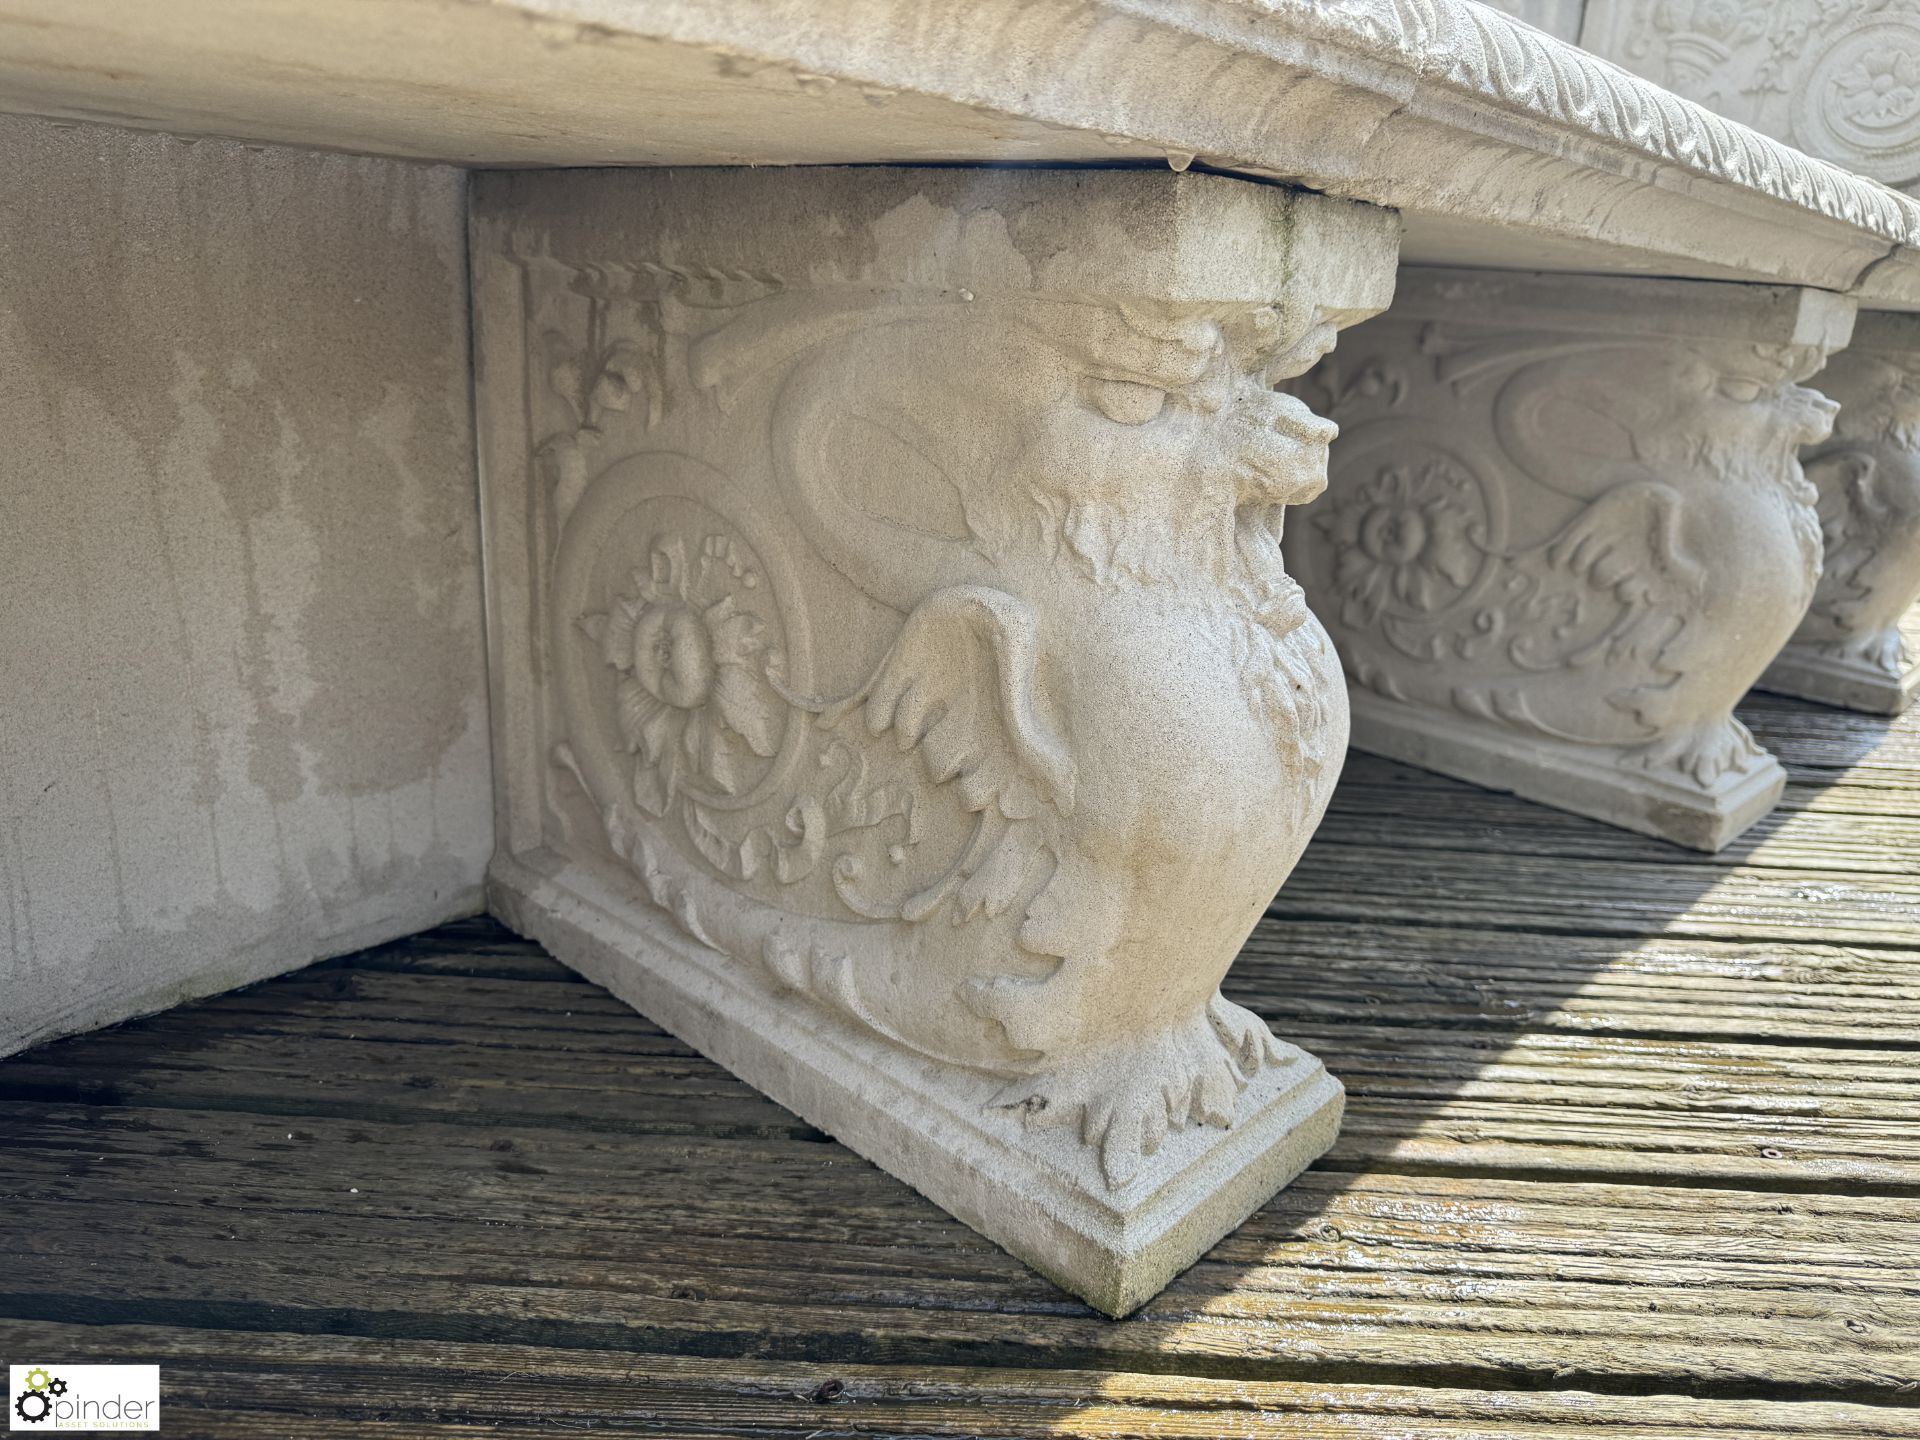 A reconstituted Haddonstone Garden Bench, with classical decoration by Raphael, approx. 40in x 86in - Image 11 of 15